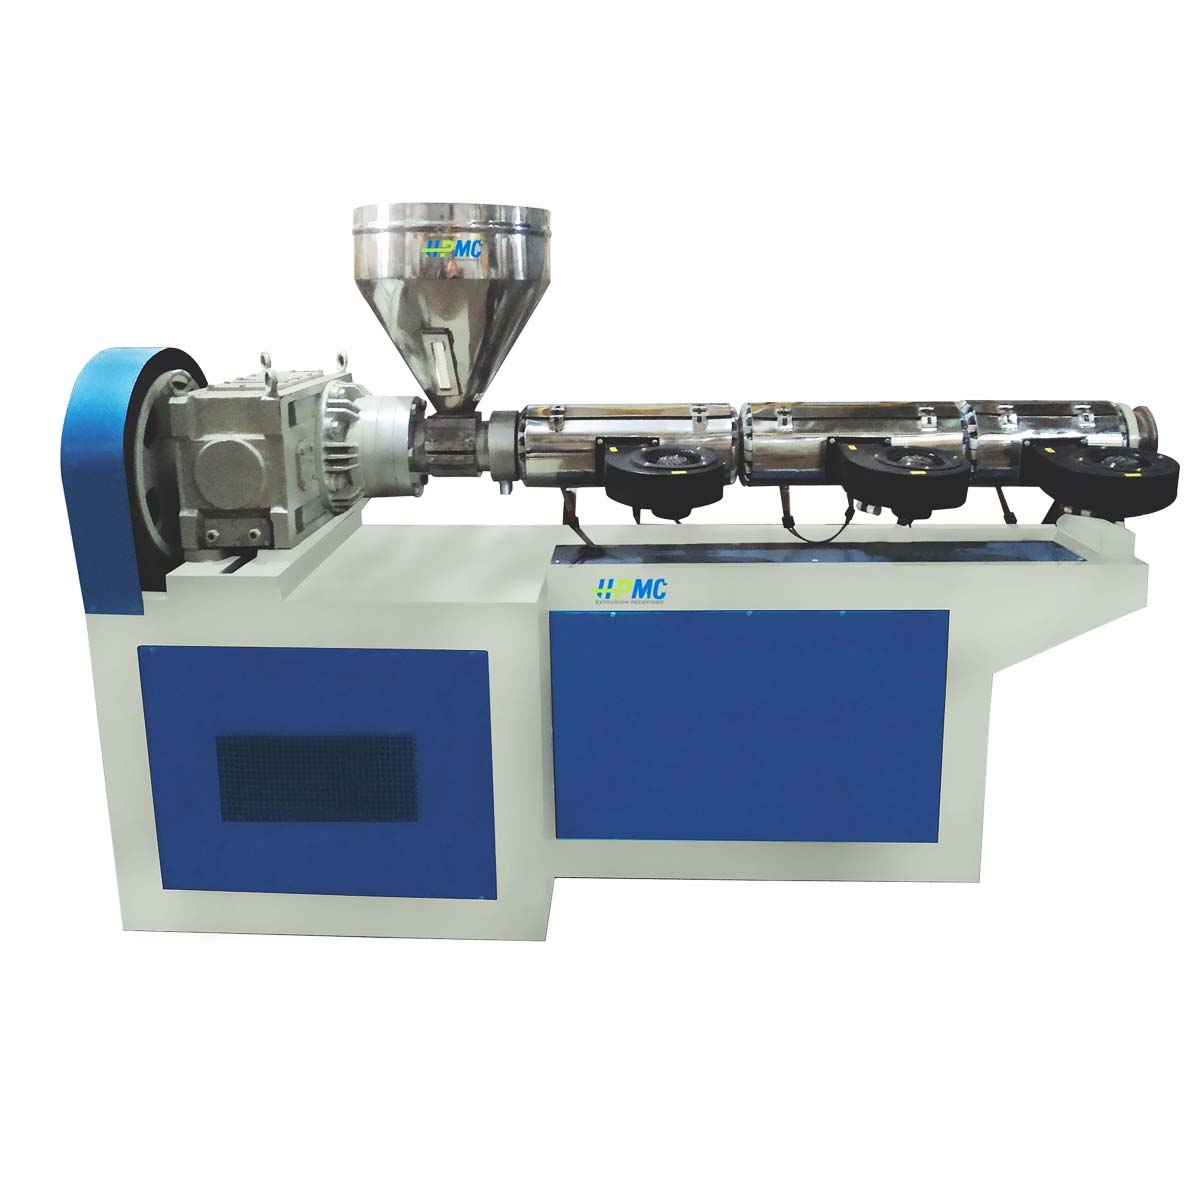 Single Screw Extruder Manufacturers, Suppliers and Exporters in Delhi